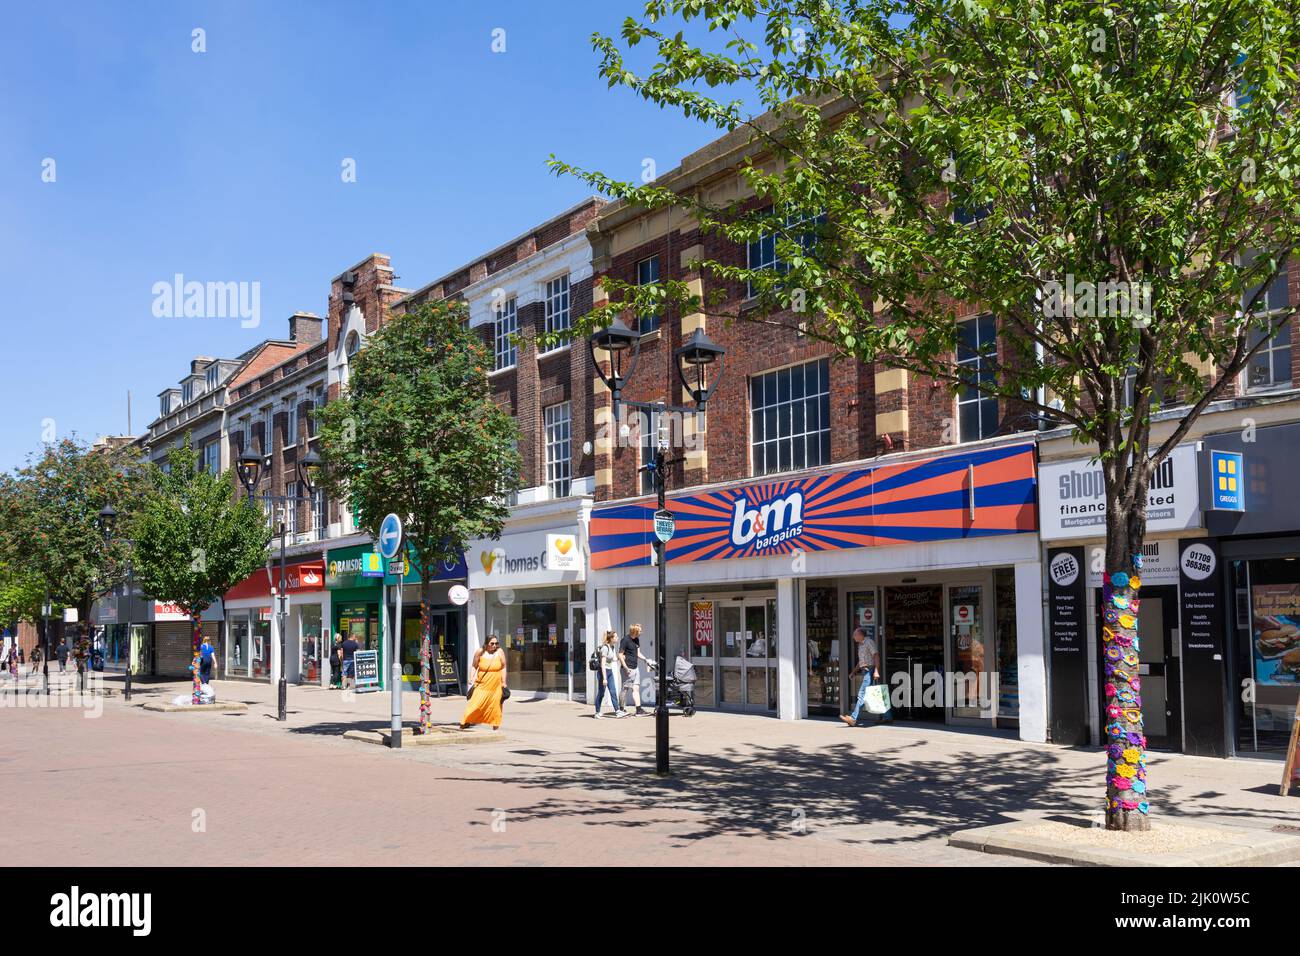 Shops and businesses in Rotherham Town centre Rotherham South Yorkshire England UK GB Europe Stock Photo